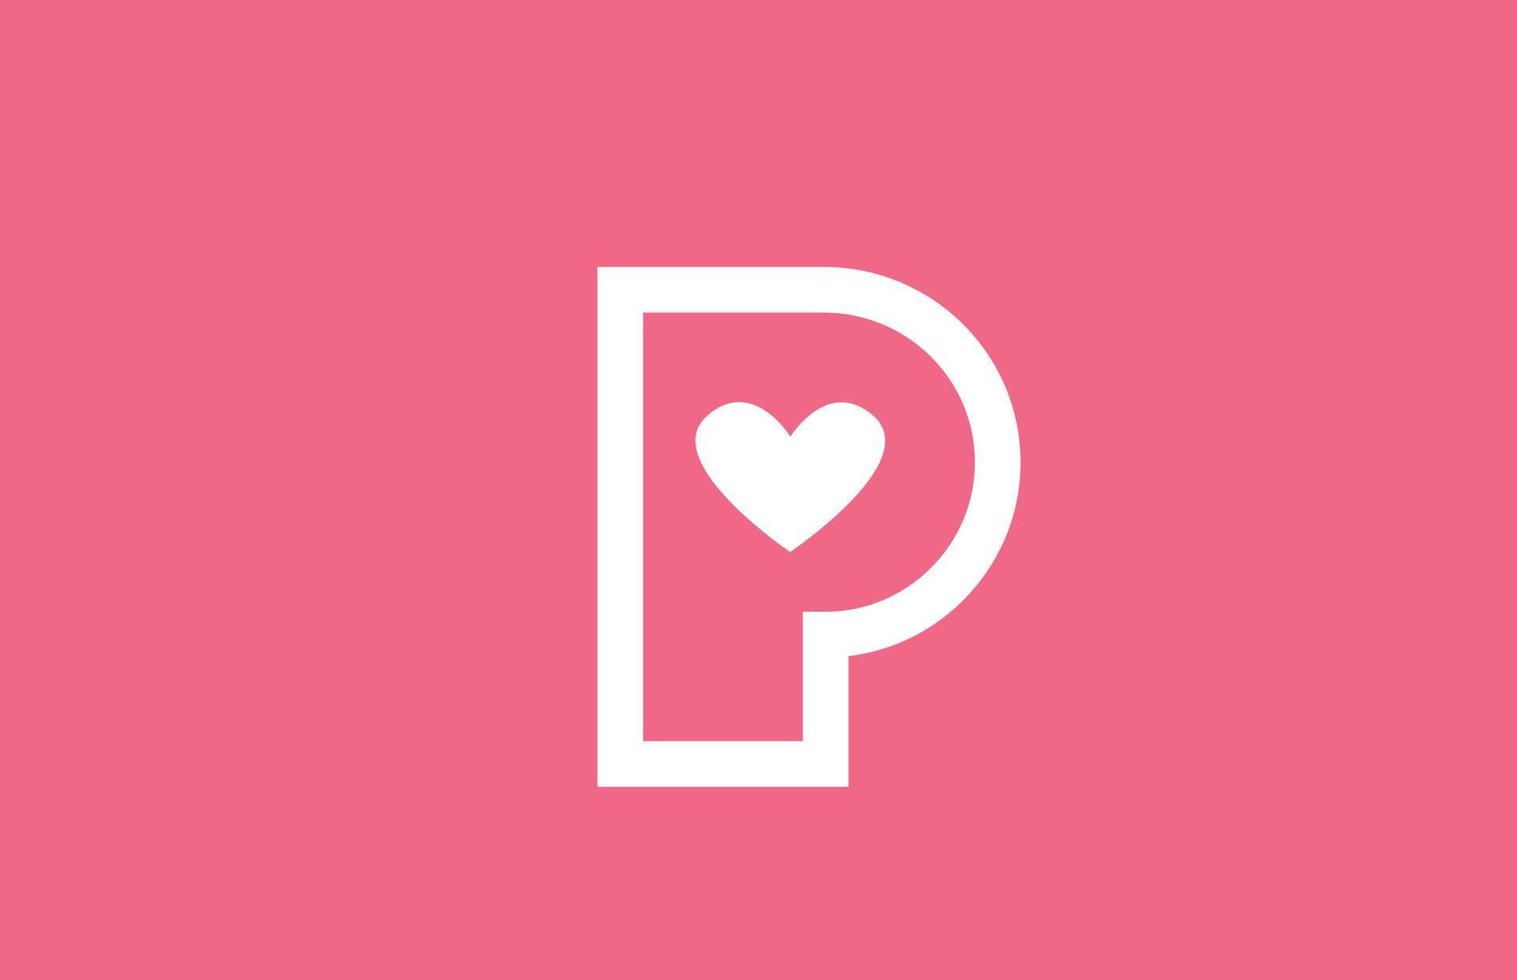 p love heart alphabet letter logo icon with pink color and line creative design for a dating site company or business vector